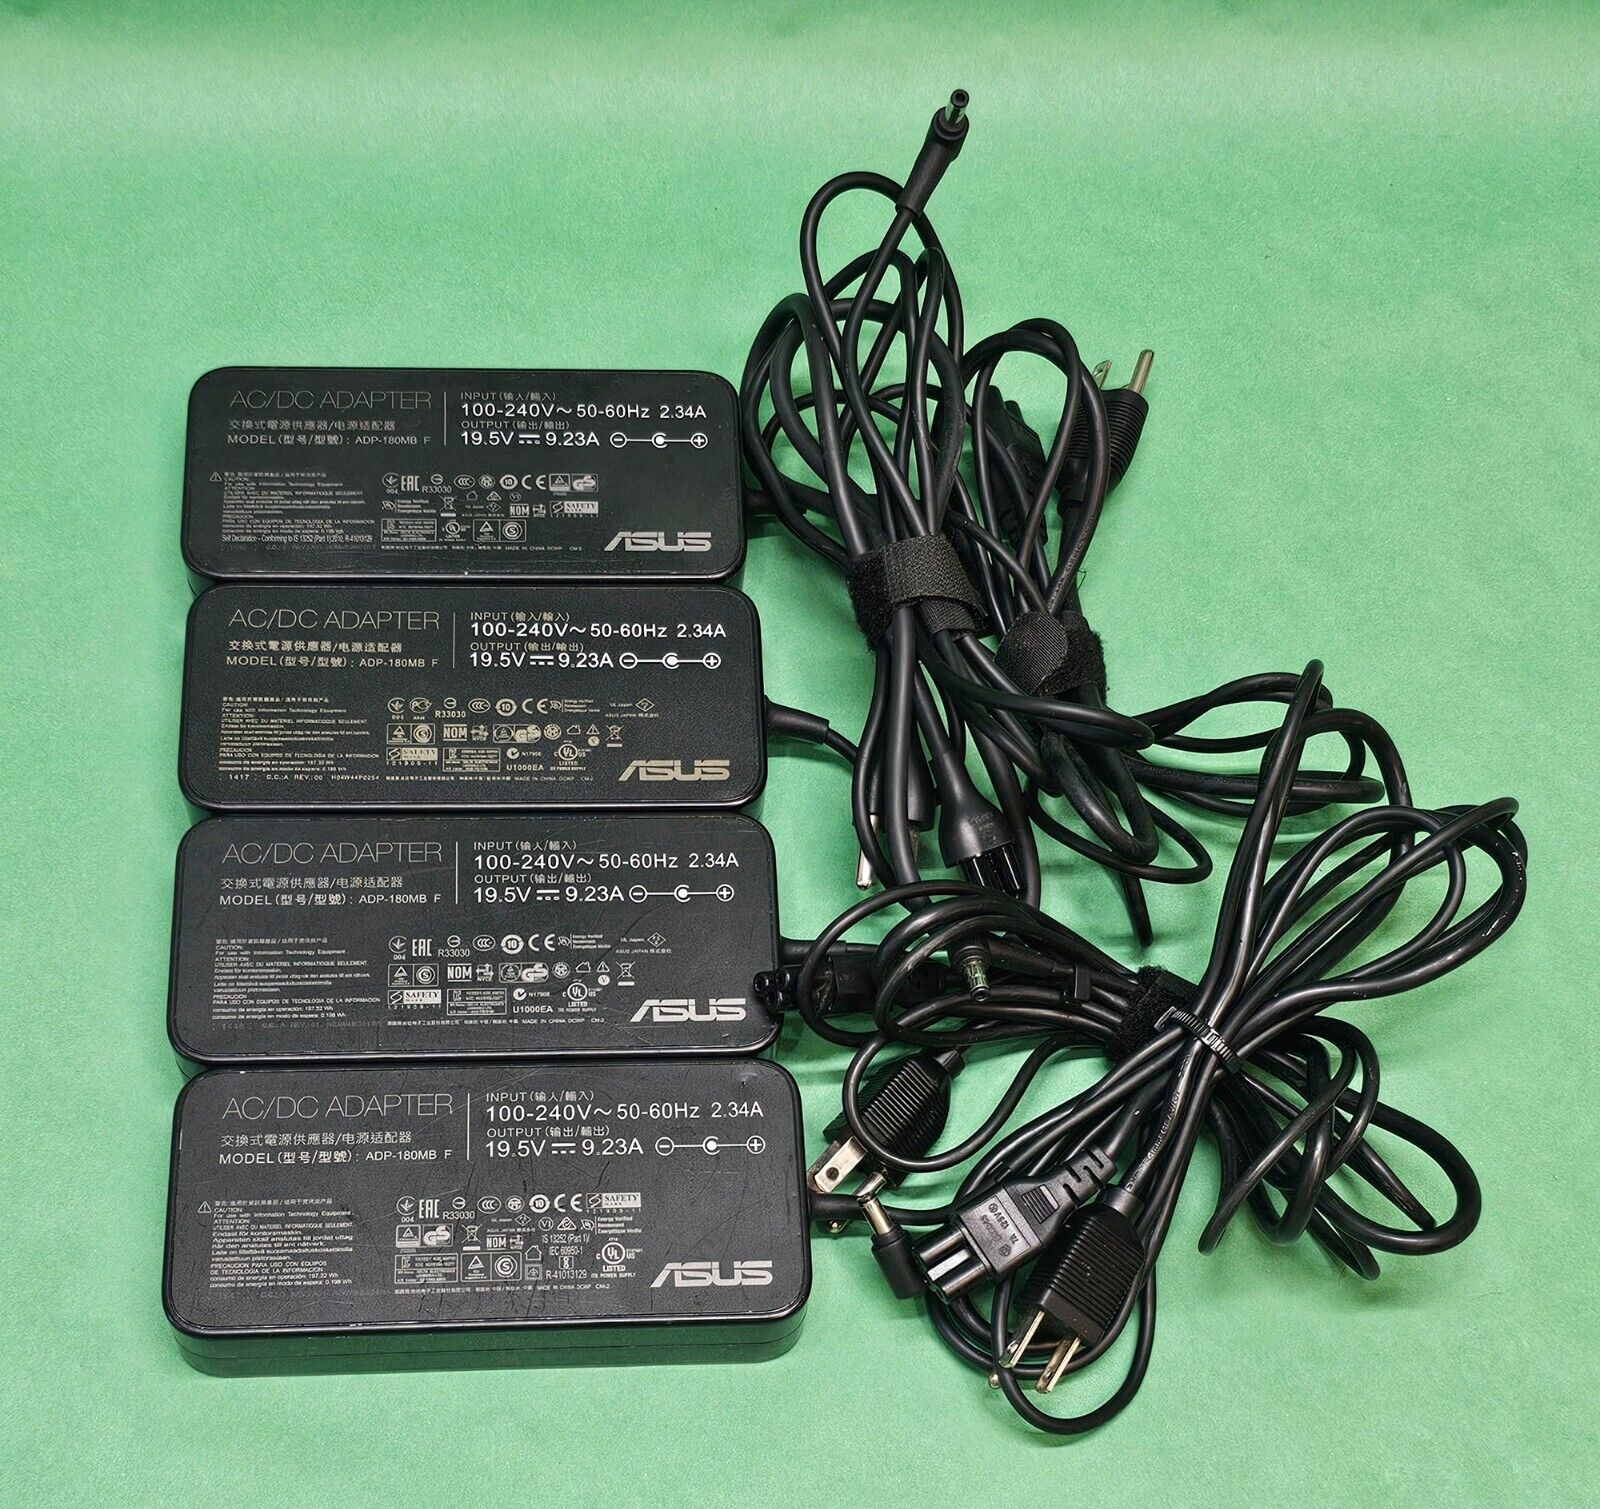 Lot of 4 Genuine ASUS Laptop Power Adapters Charger ADP-180MB F 19.5V 9.23A 180W